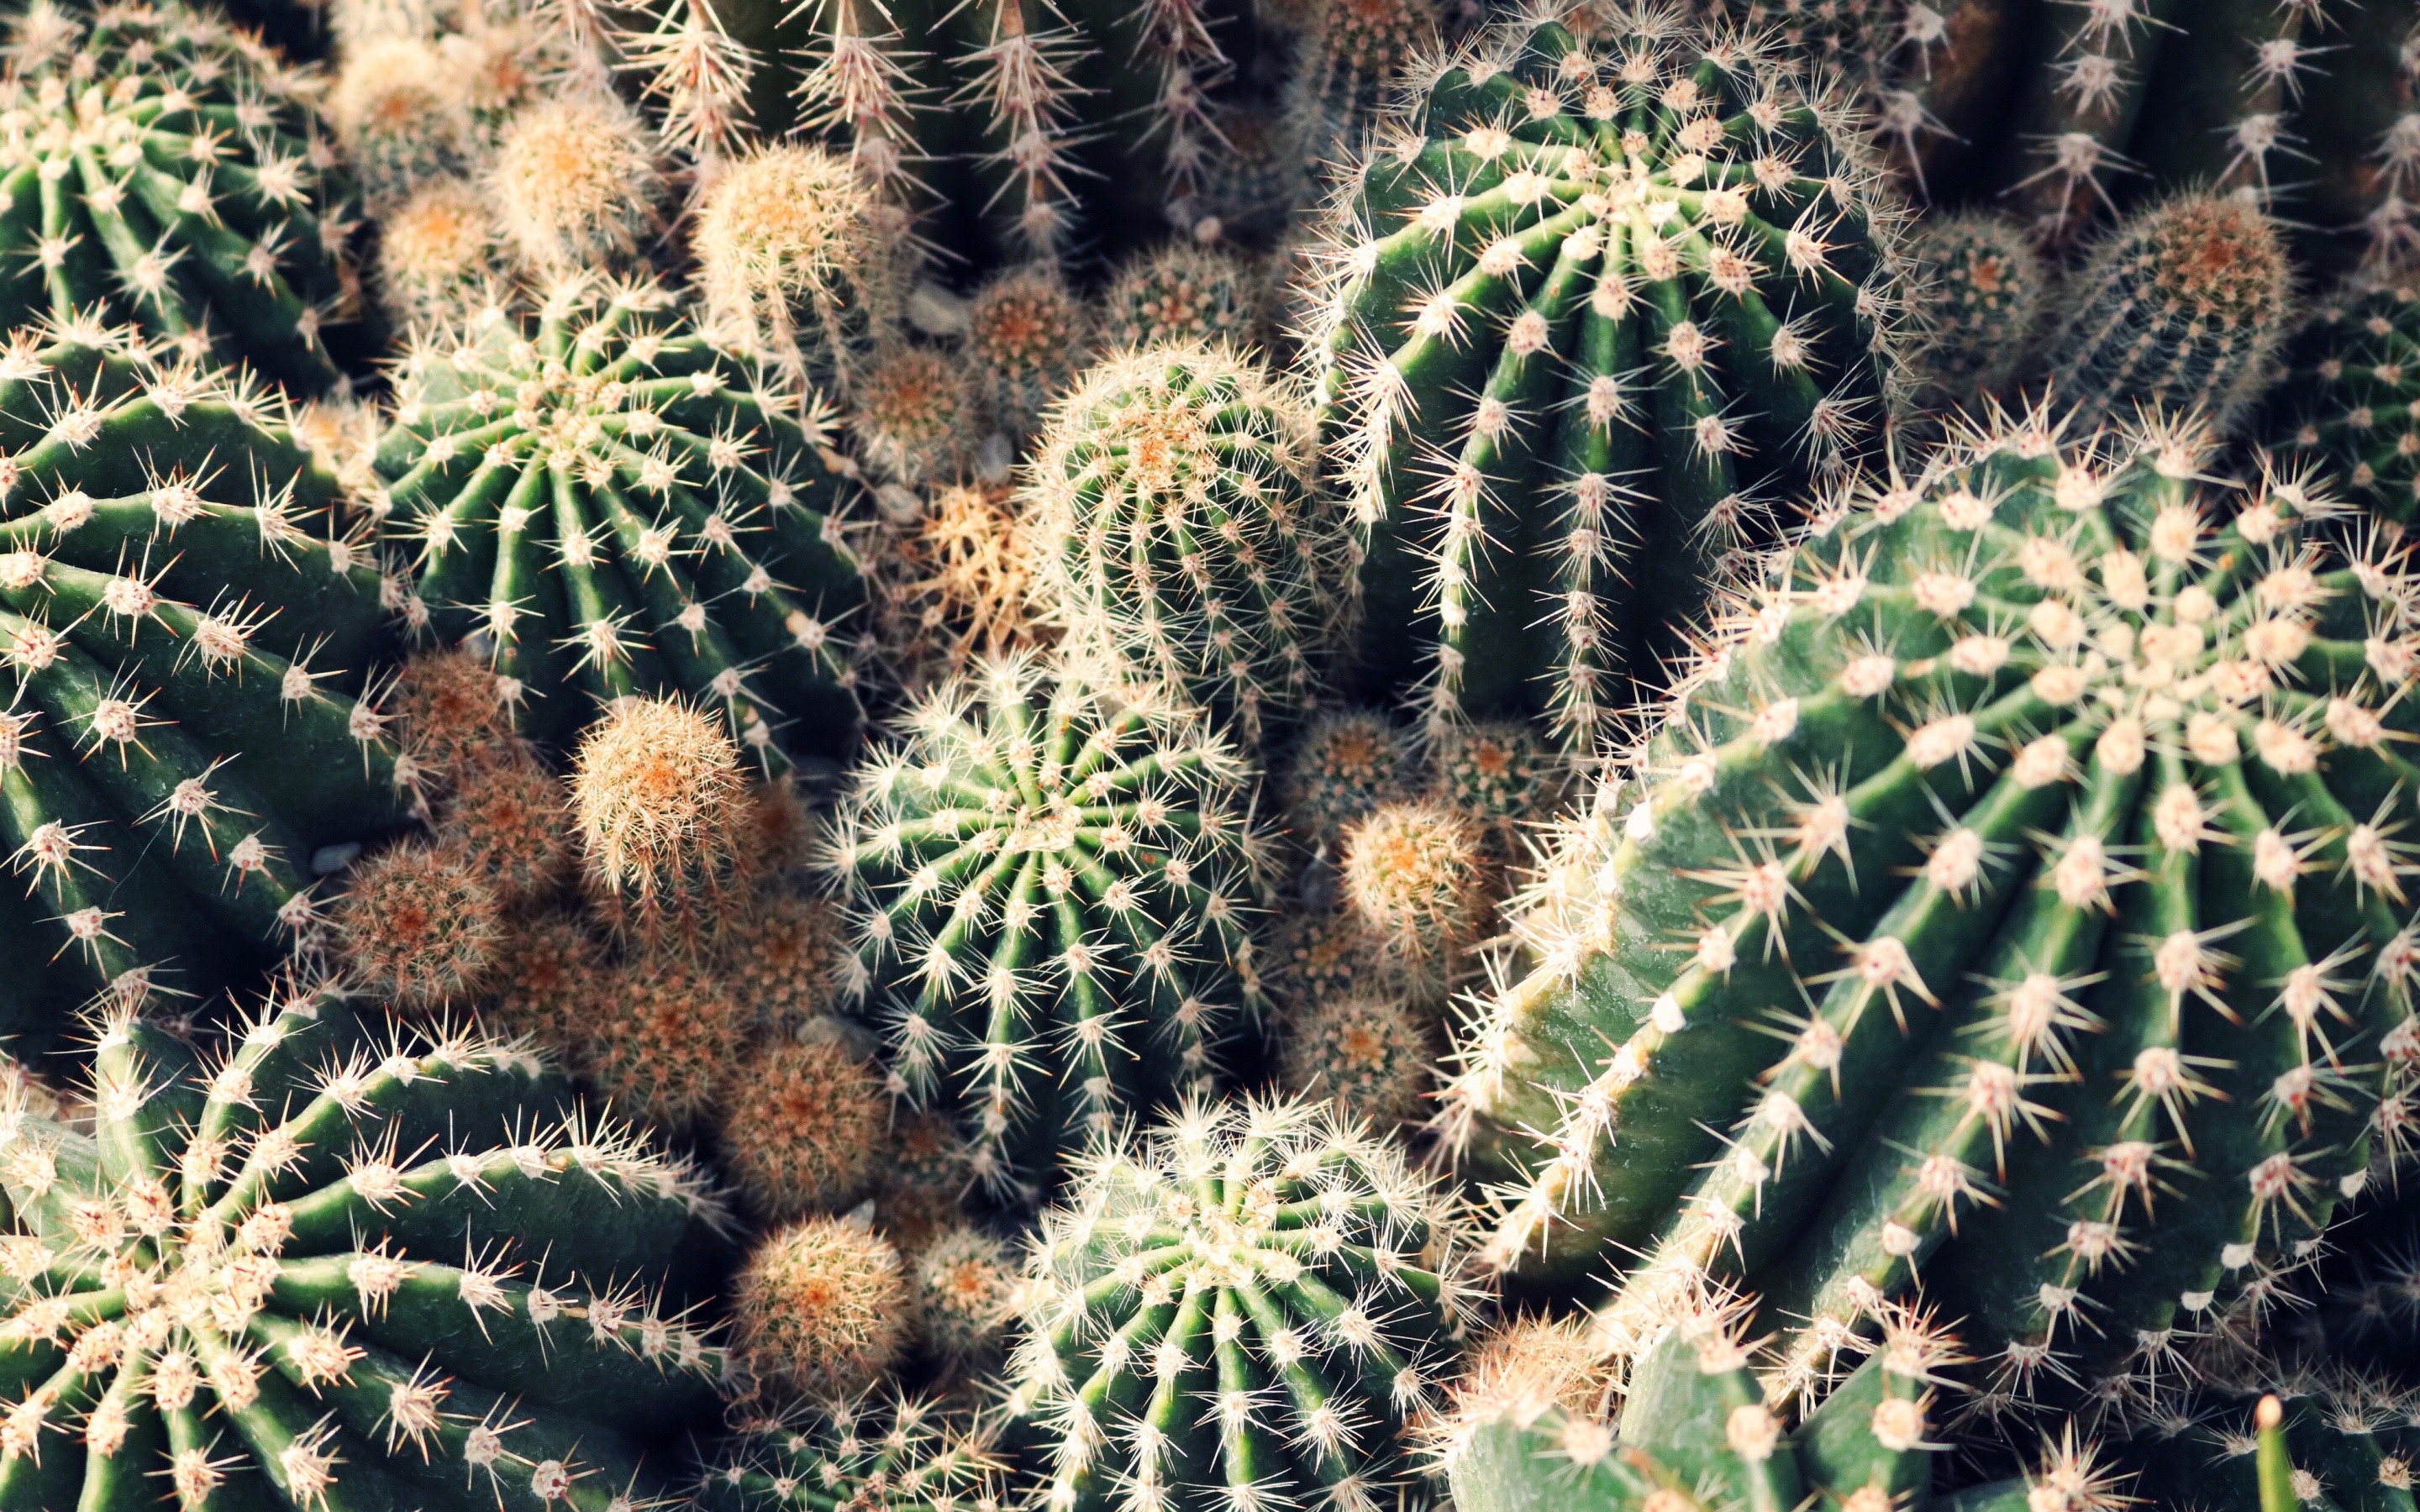 Cactus: Has thickened, fleshy parts adapted to store water. 2880x1800 HD Wallpaper.